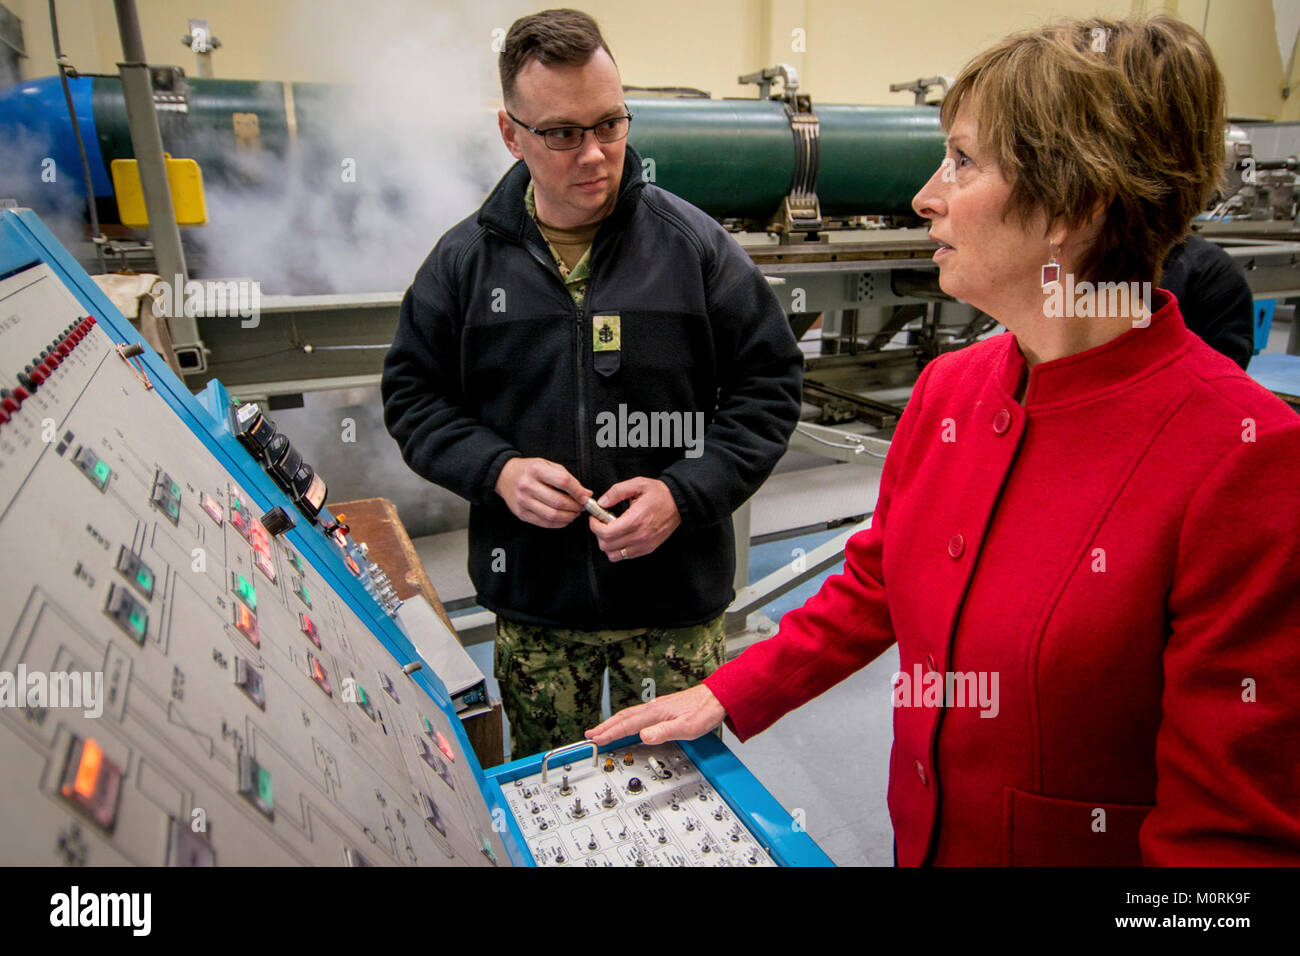 BANGOR, Wash. (Jan. 18, 2018) - Chief Petty Officer Machinist's Mate (SS) John Livingston, assigned to the Trident Training Facility(TTF), shows Mrs. Laura Hyten, wife of Gen. John Hyten, commander of U.S. Strategic Command, how to test equipment in the torpedo lab at the TTF at Naval Base Kitsap-Bangor, Wash., Jan. 18, 2018. Gen. and Mrs. Hyten visited staff and facilities assigned to Commander Submarine Group 9 at Naval Base Kitsap-Bangor to see the operations of one leg of the nuclear triad. (U.S. Navy Stock Photo